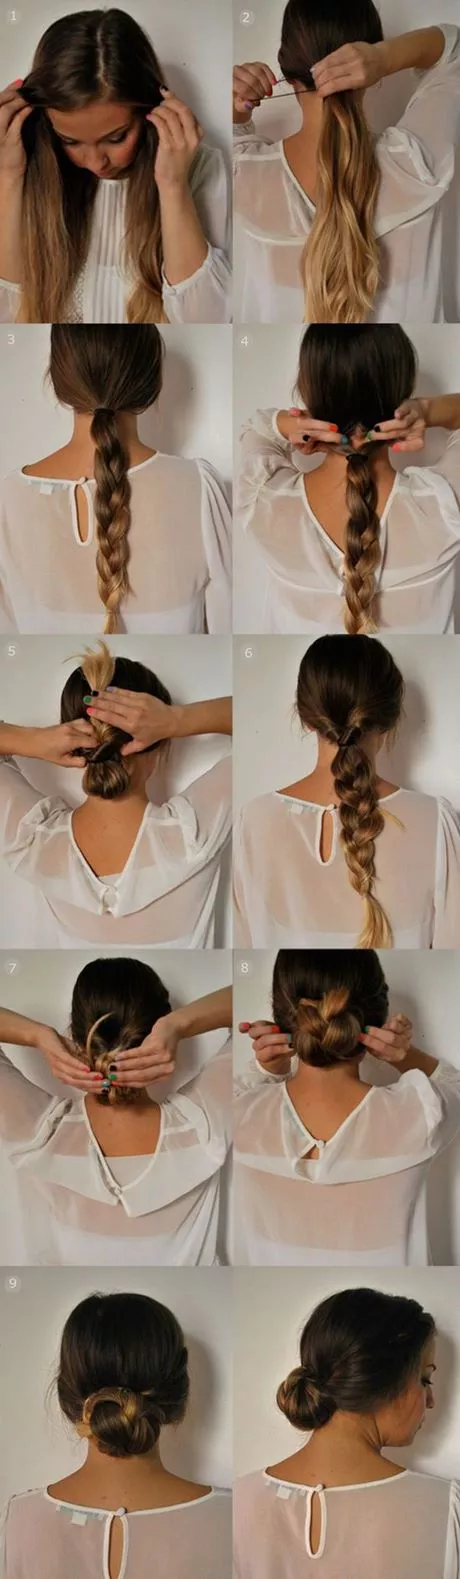 Easy and simple hair style easy-and-simple-hair-style-25_10-2-2